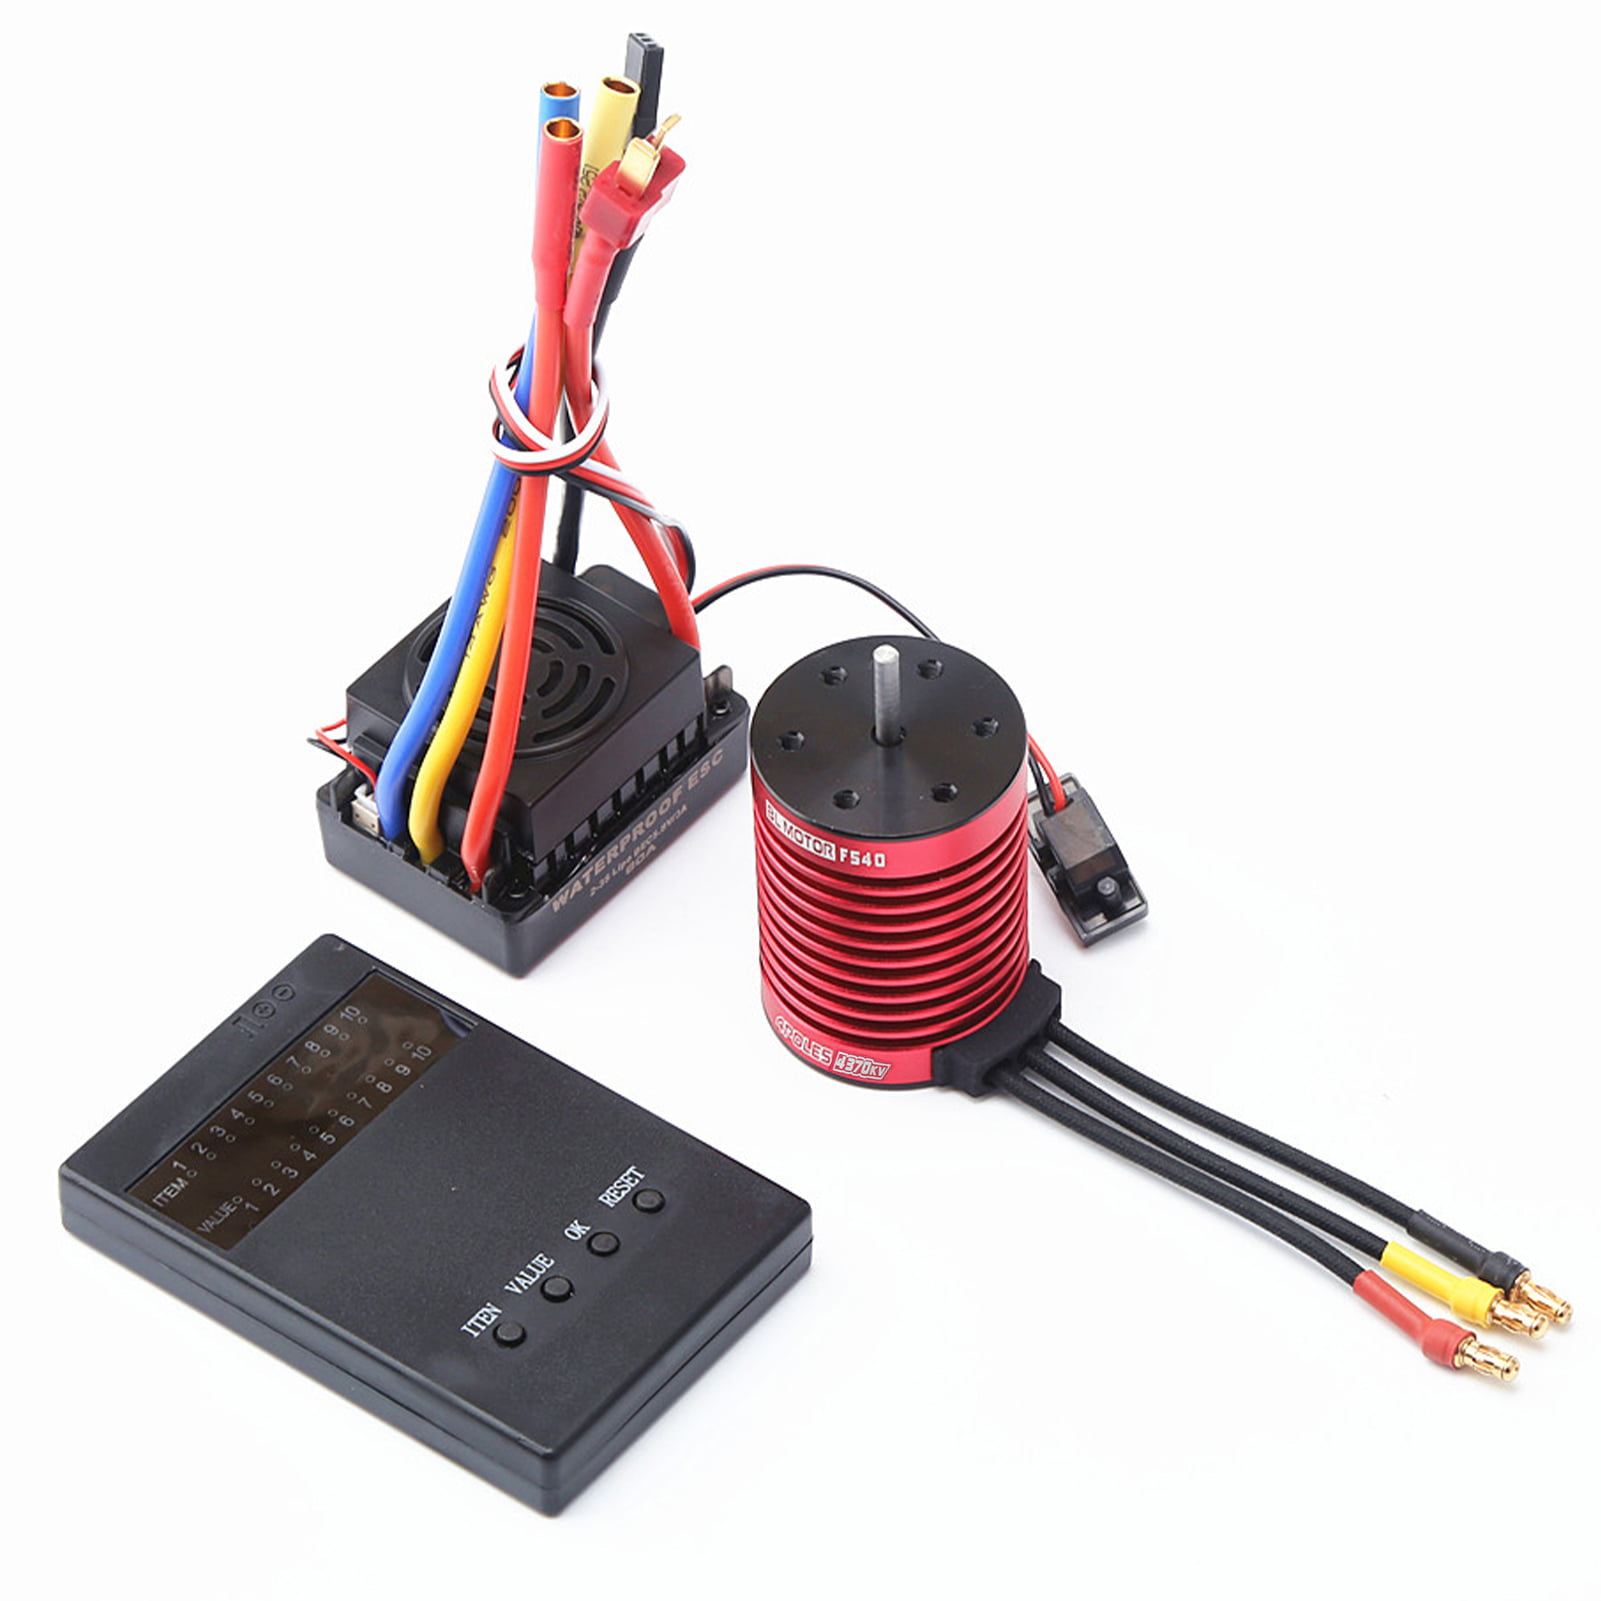 Waterproof 9T 4370KV Brushless Motor with 60A ESC ESC Electronic Speed Controller and Digital LED Program Card Combo for 1/10 RC Car Truck